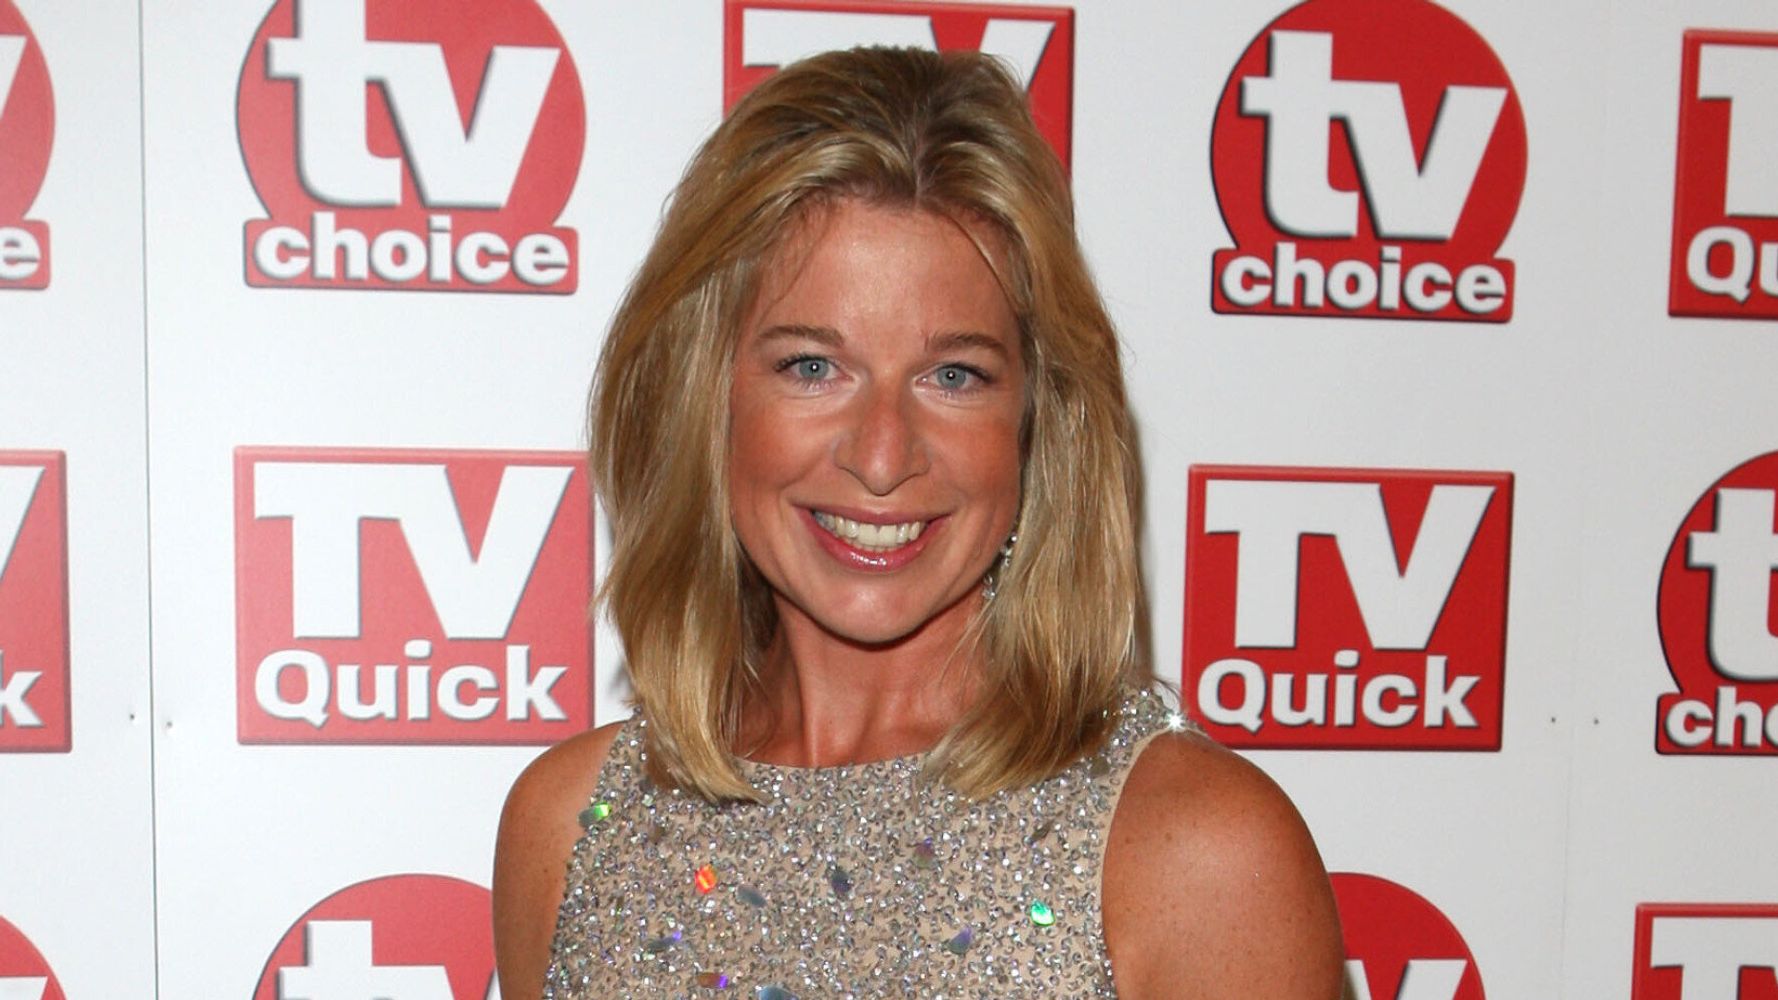 ‘the Apprentice Former Star Katie Hopkins Hits Out At Karren Brady But Spells Her Name Wrong